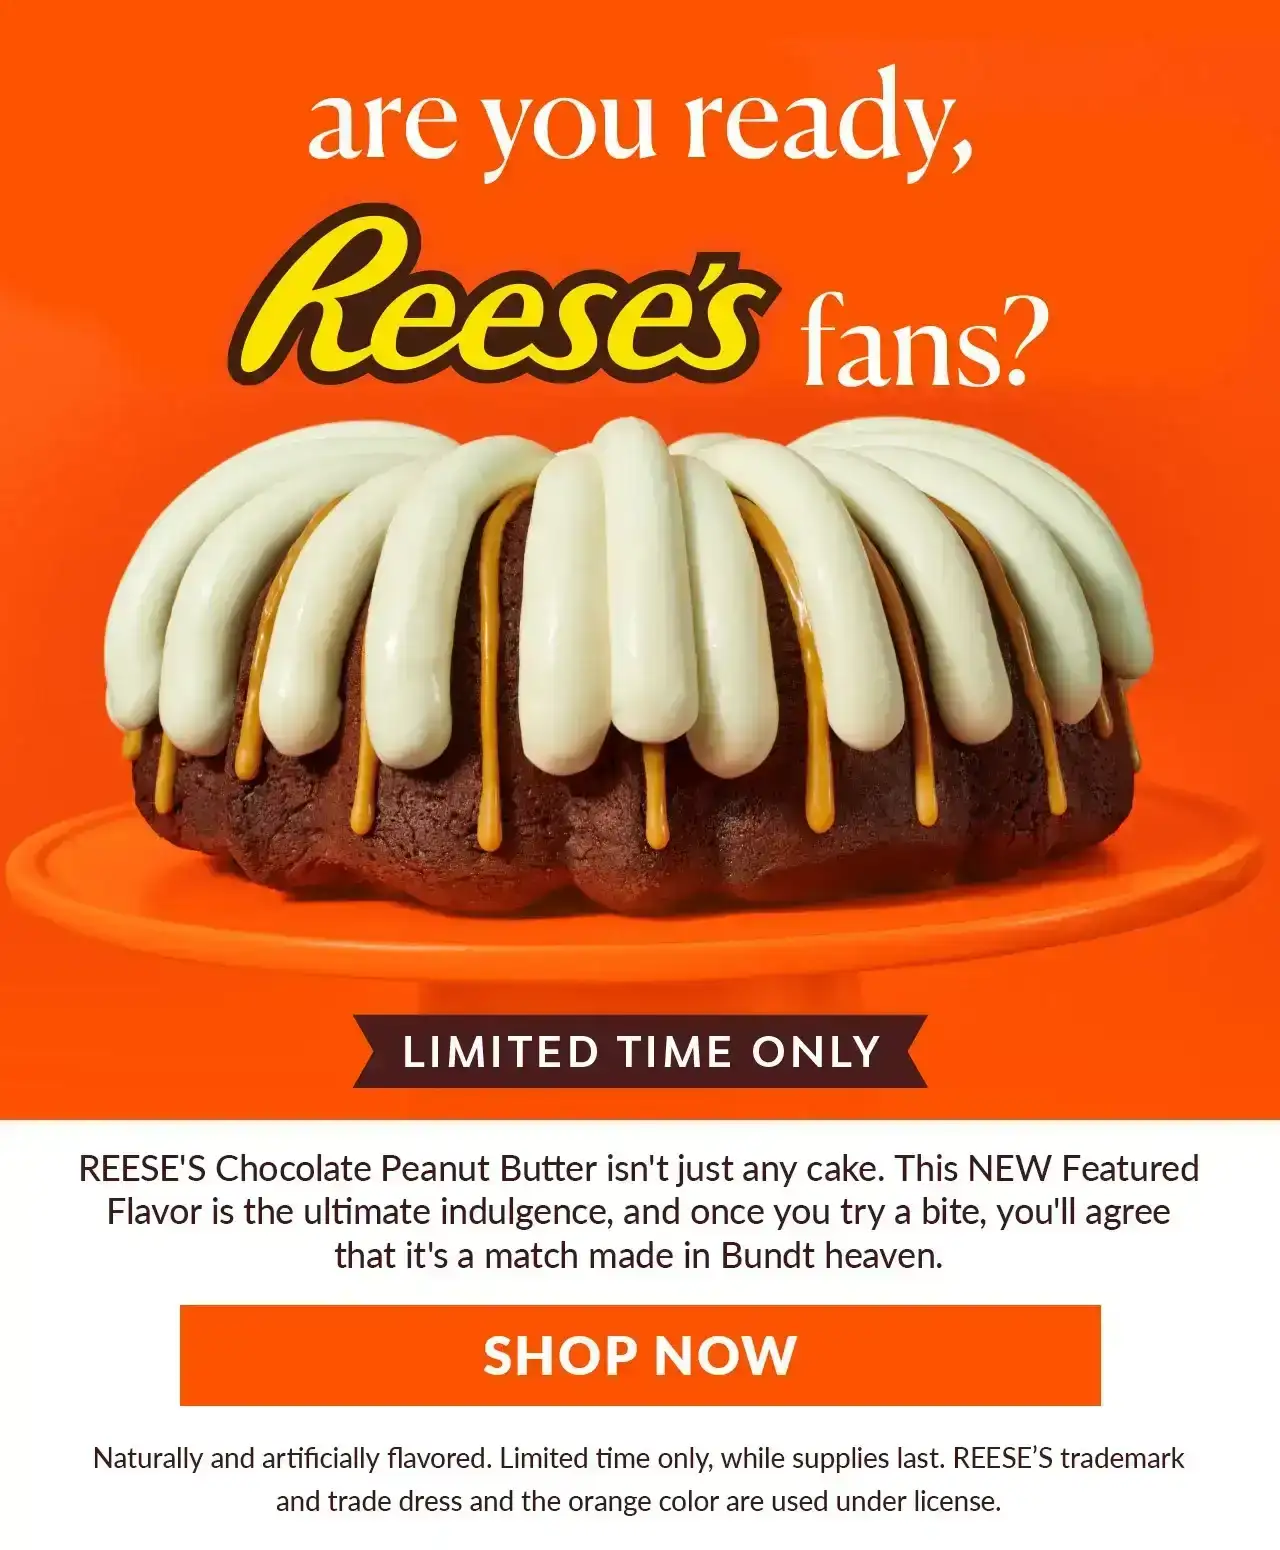 REESE'S Chocolate Peanut Butter